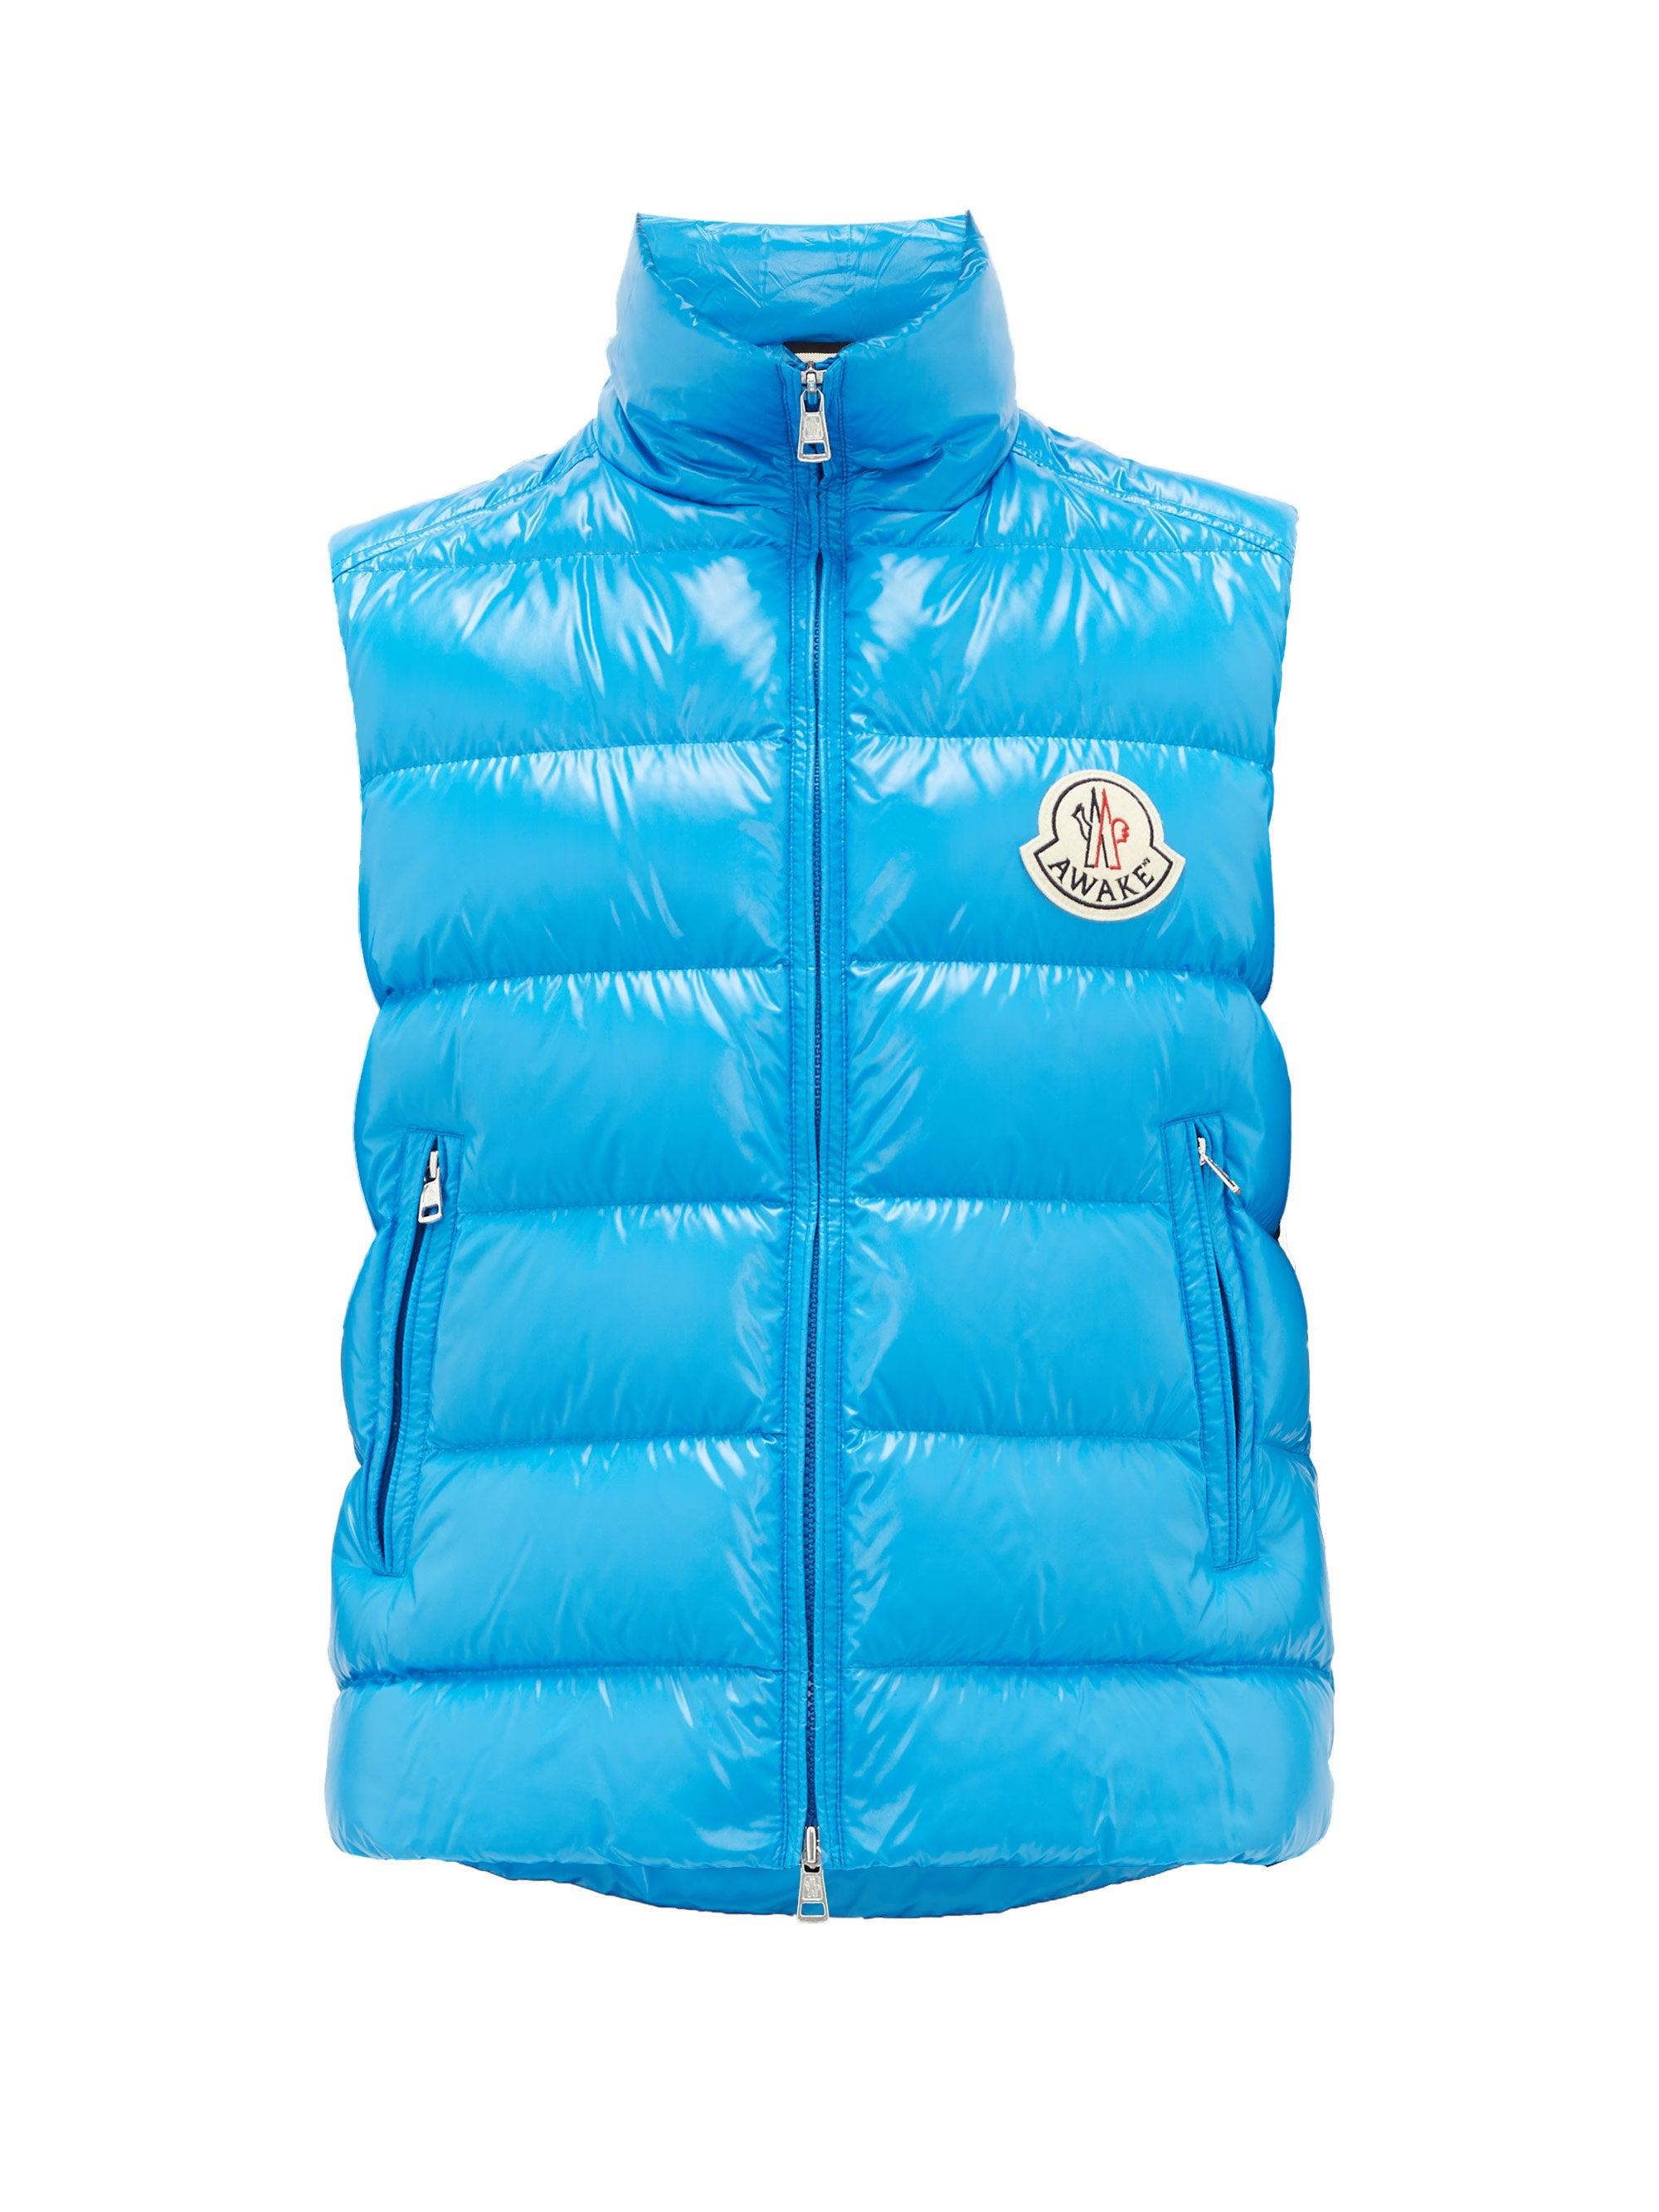 2 Moncler 1952 X Awake Ny Logo-patch Technical Gilet in Blue for Men - Lyst